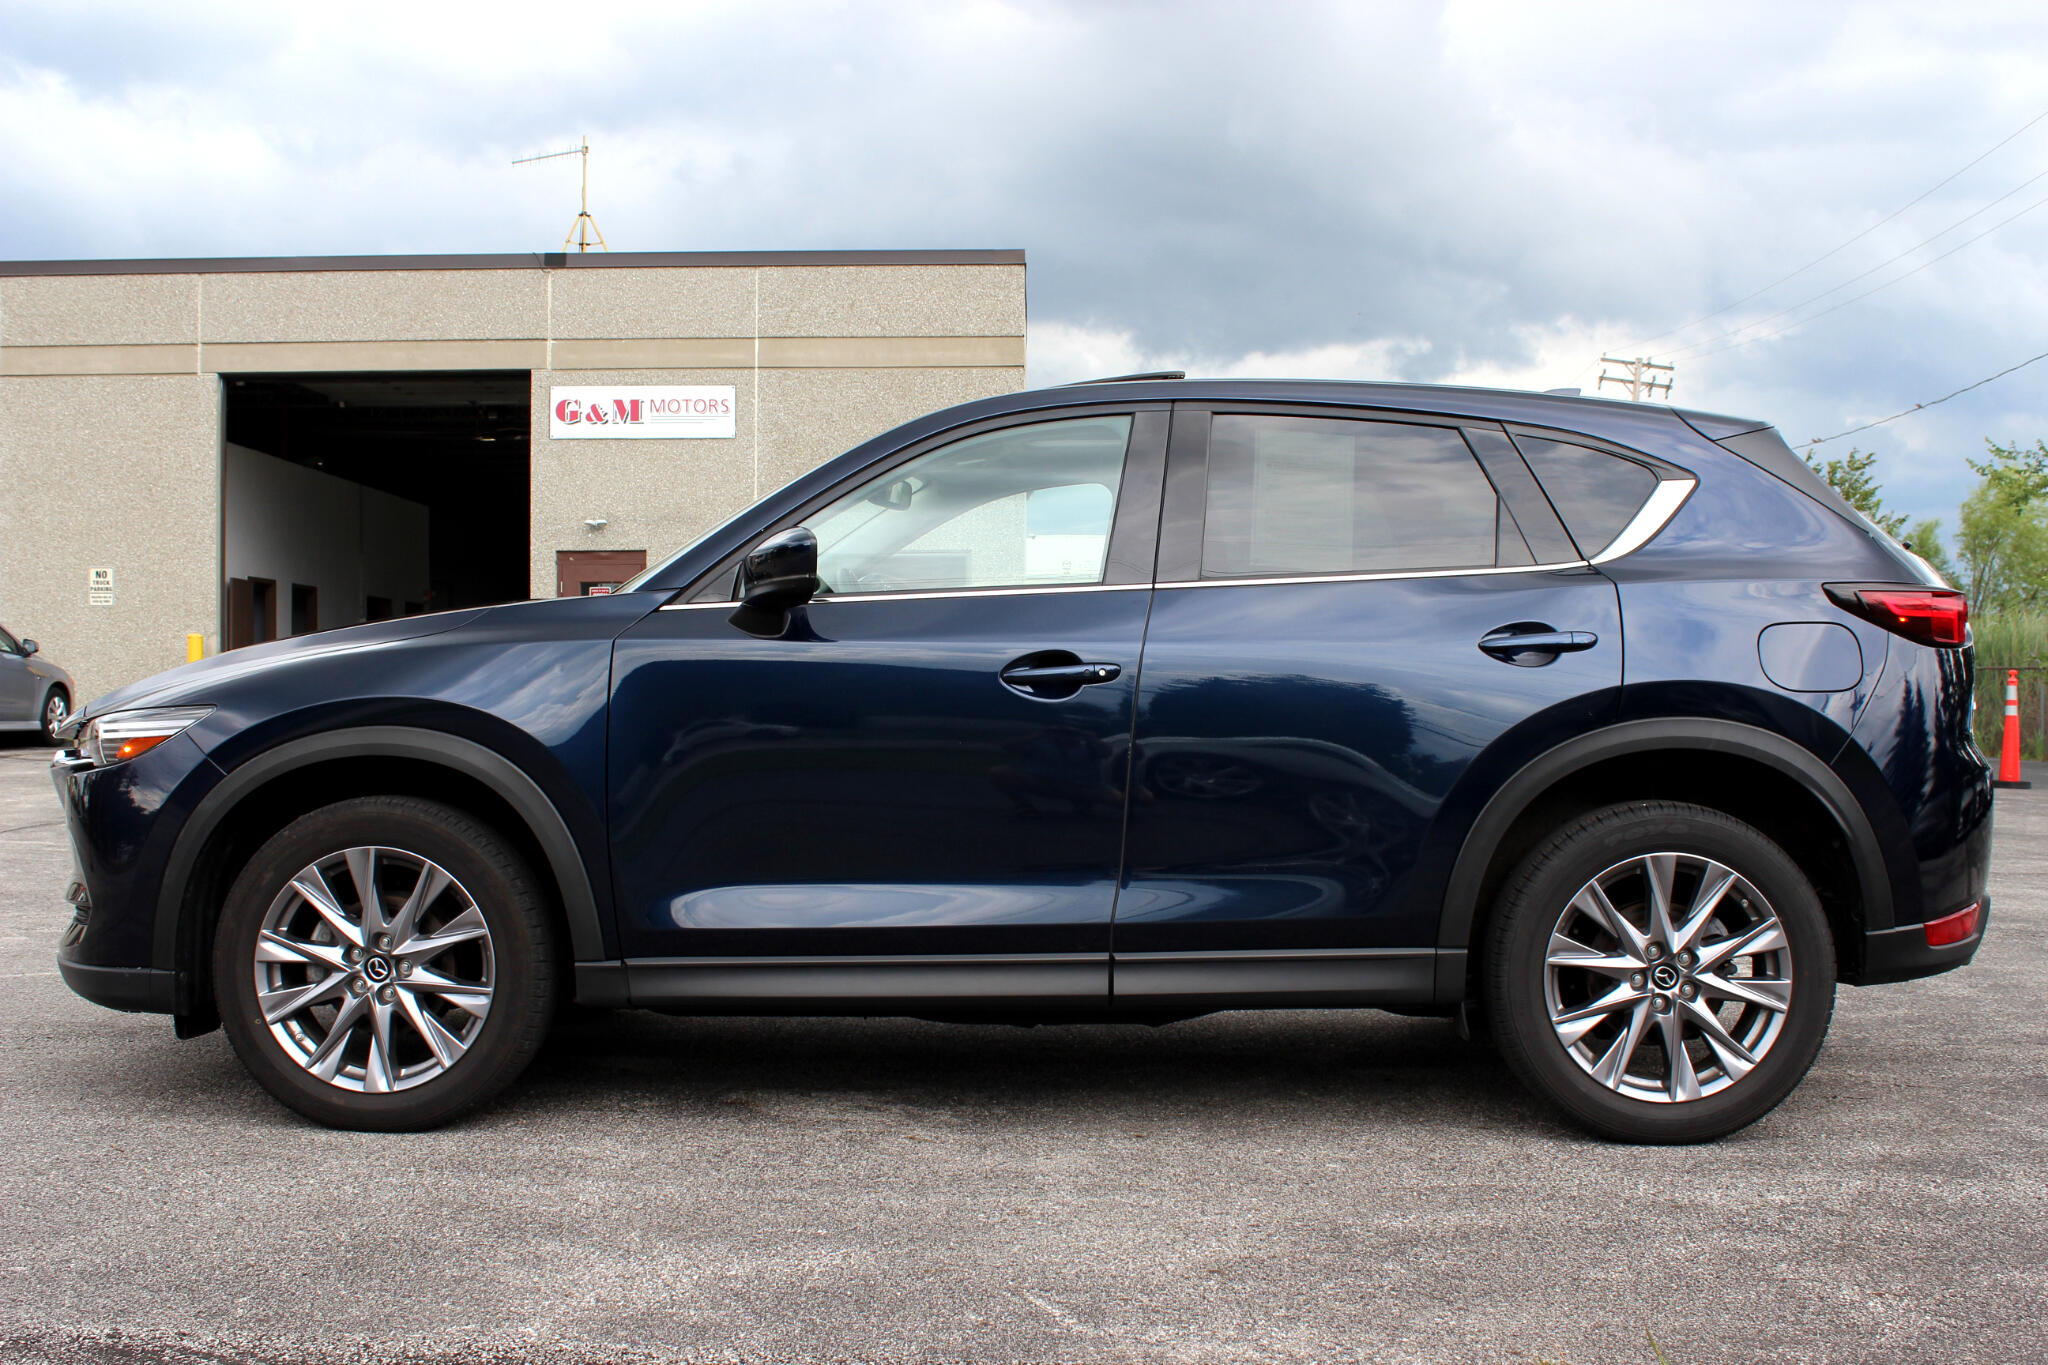 Used 2019 Mazda CX-5 Grand Touring FWD for Sale in Cleveland OH 44139 G ...